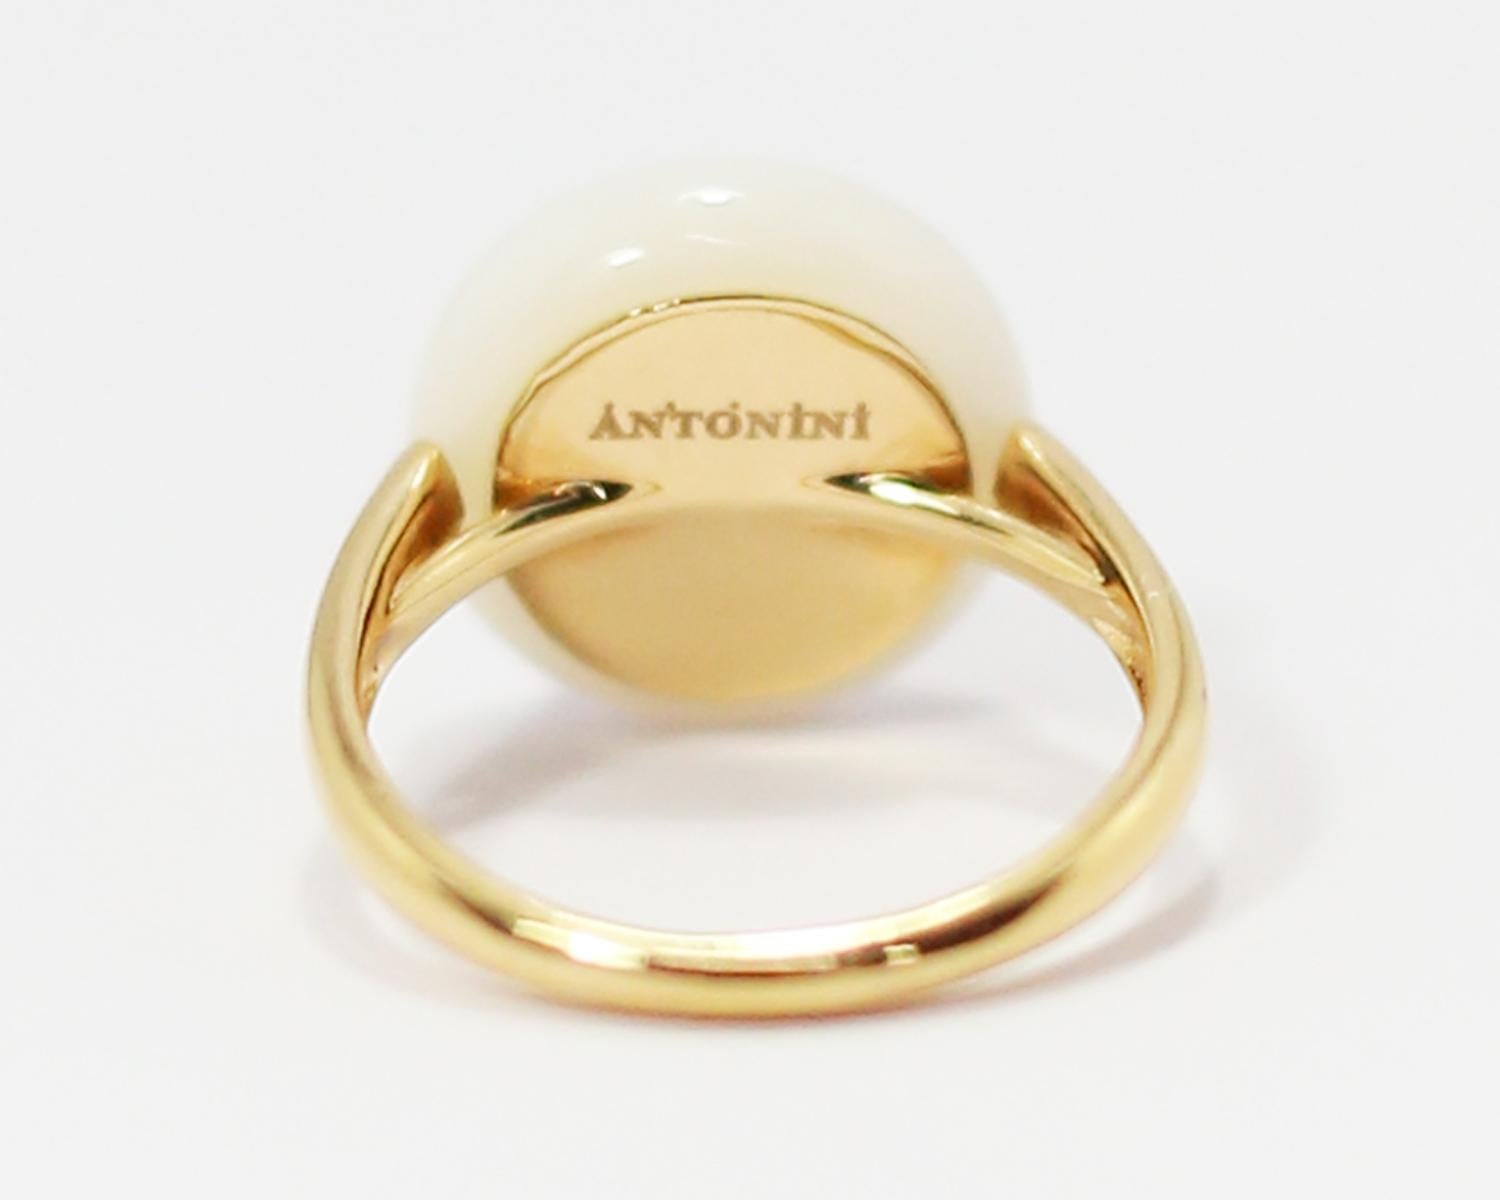 READY TO SHIP
*Shipment of this piece is not affected by COVID-19. Orders welcome!*
◘This ring is an icon of the Porto Cervo Collection made in 2011
◘ Size Europe 53, US 7 but can be adapted.  
◘ 18kt gold Weight 4.50gr with stones 5.72gr
◘